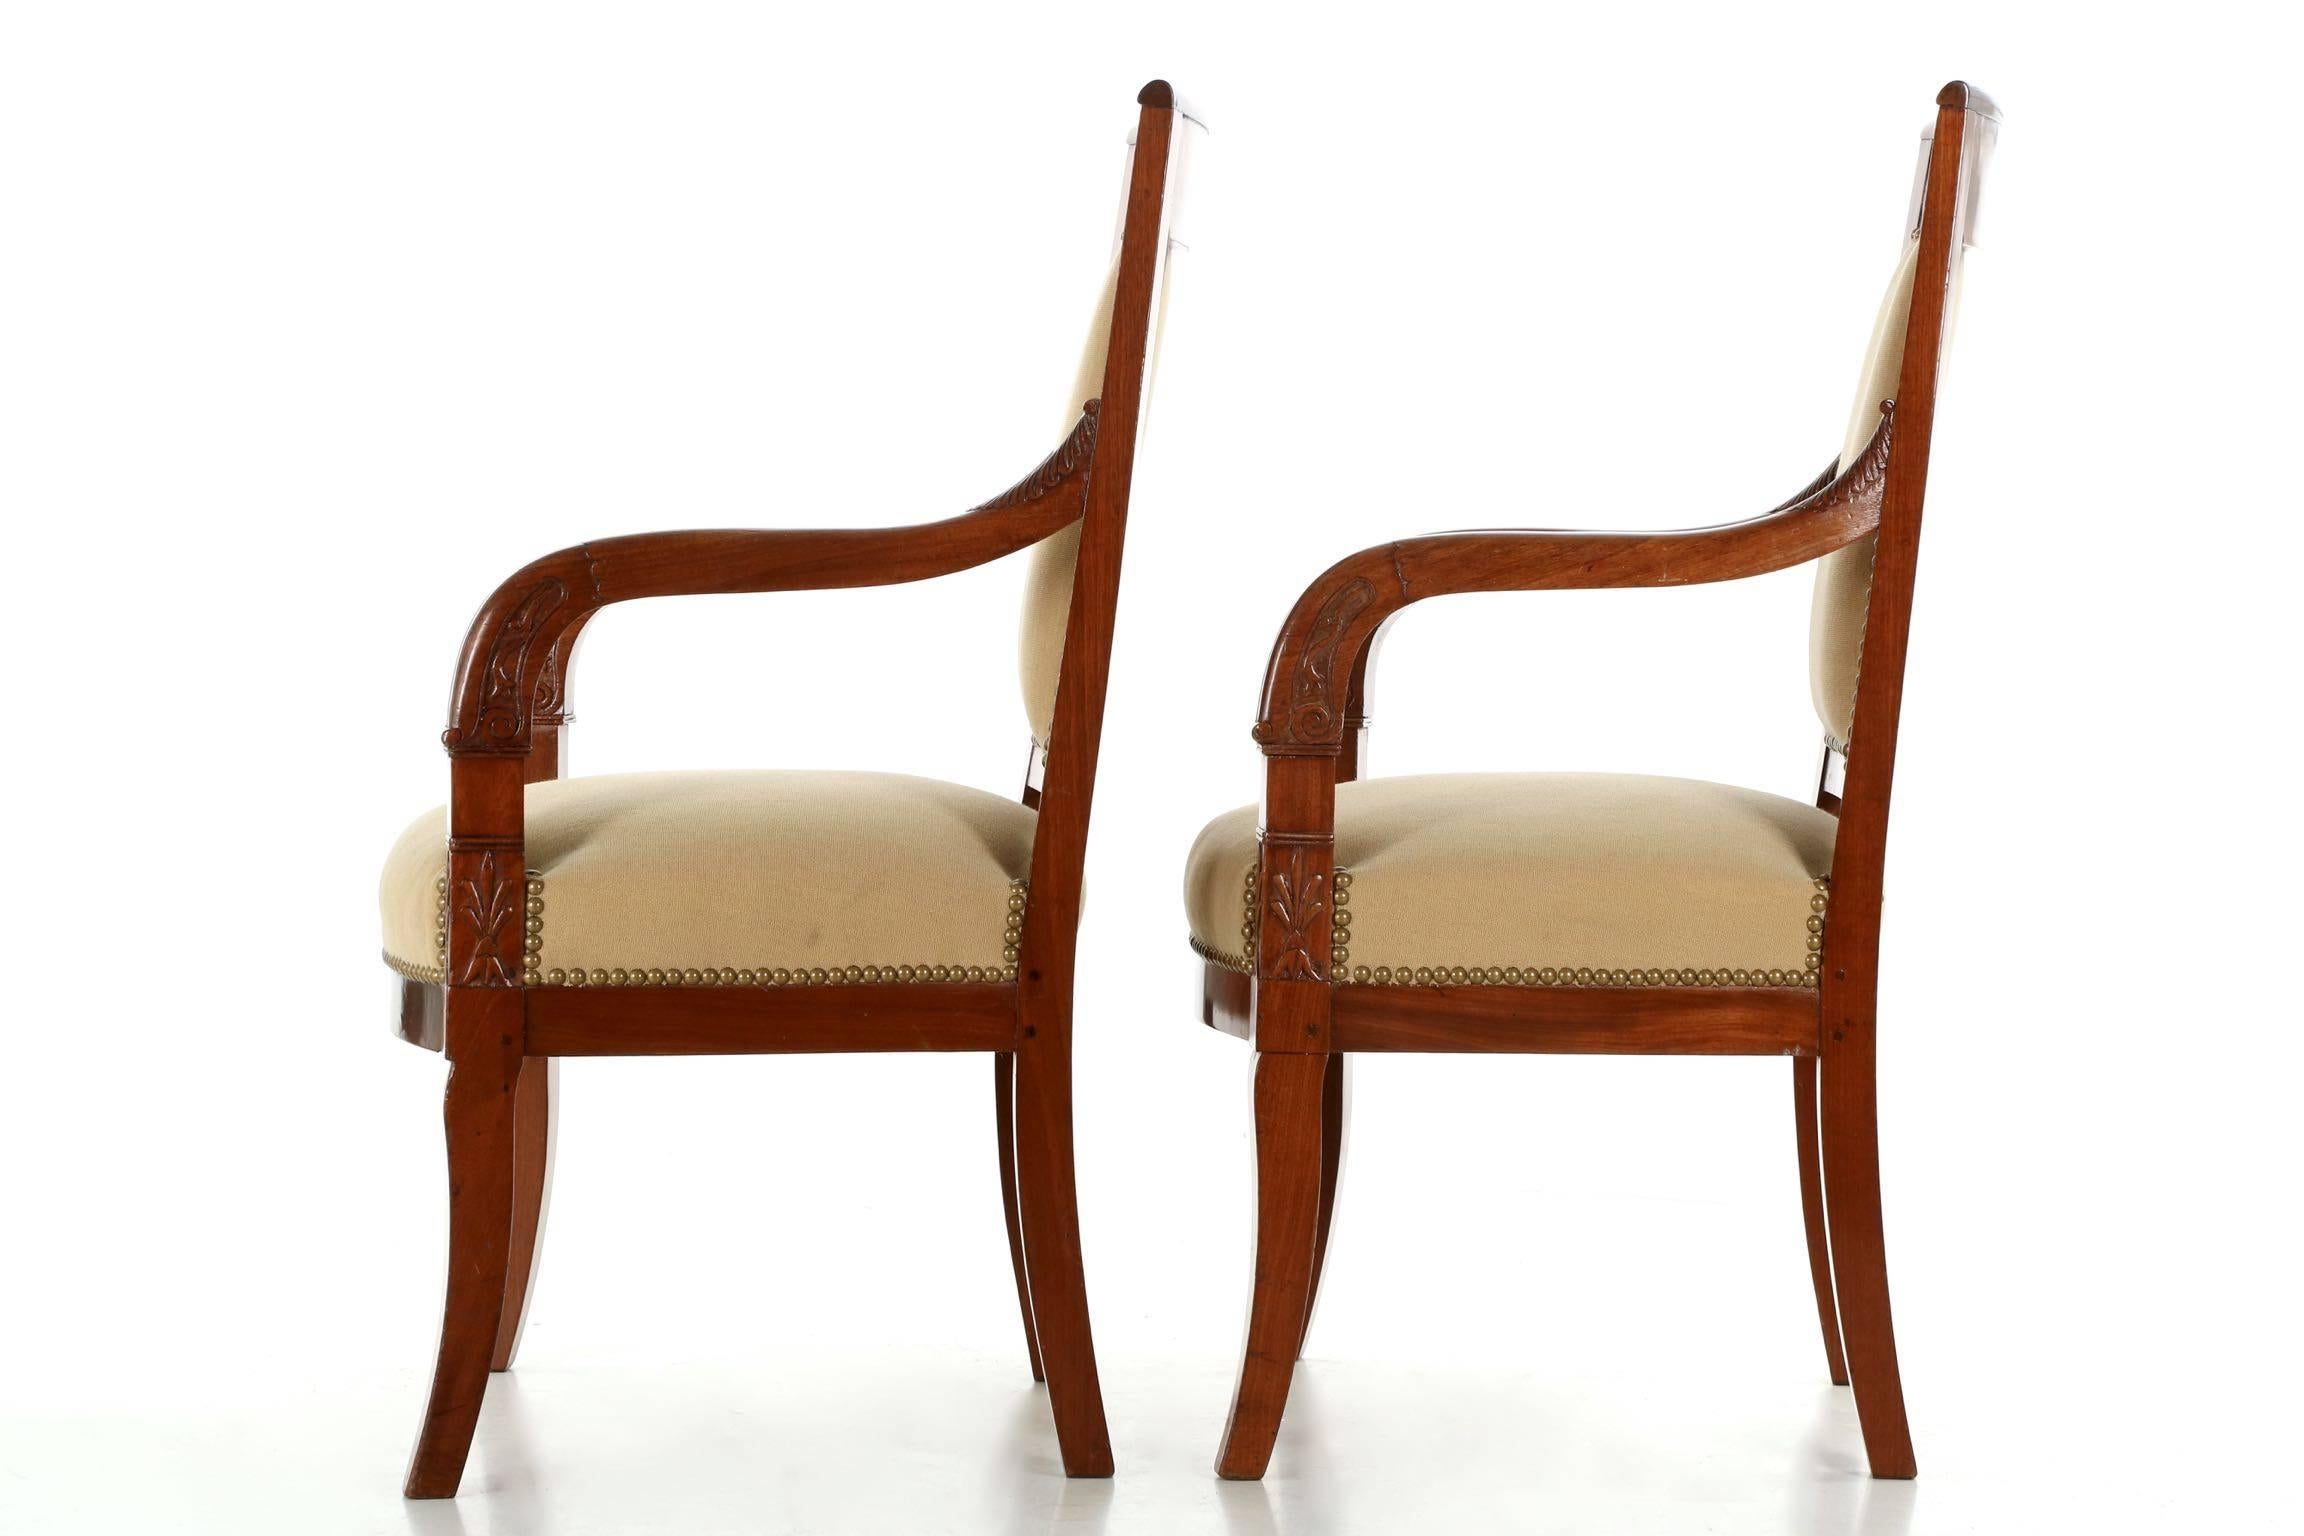 The deep ruby hues of the brilliant high polish mahogany primary woods on both chairs is just gorgeous. Designed clearly in the Empire taste, the pair is probably from the turn of the century while being crafted with earlier techniques - the seat